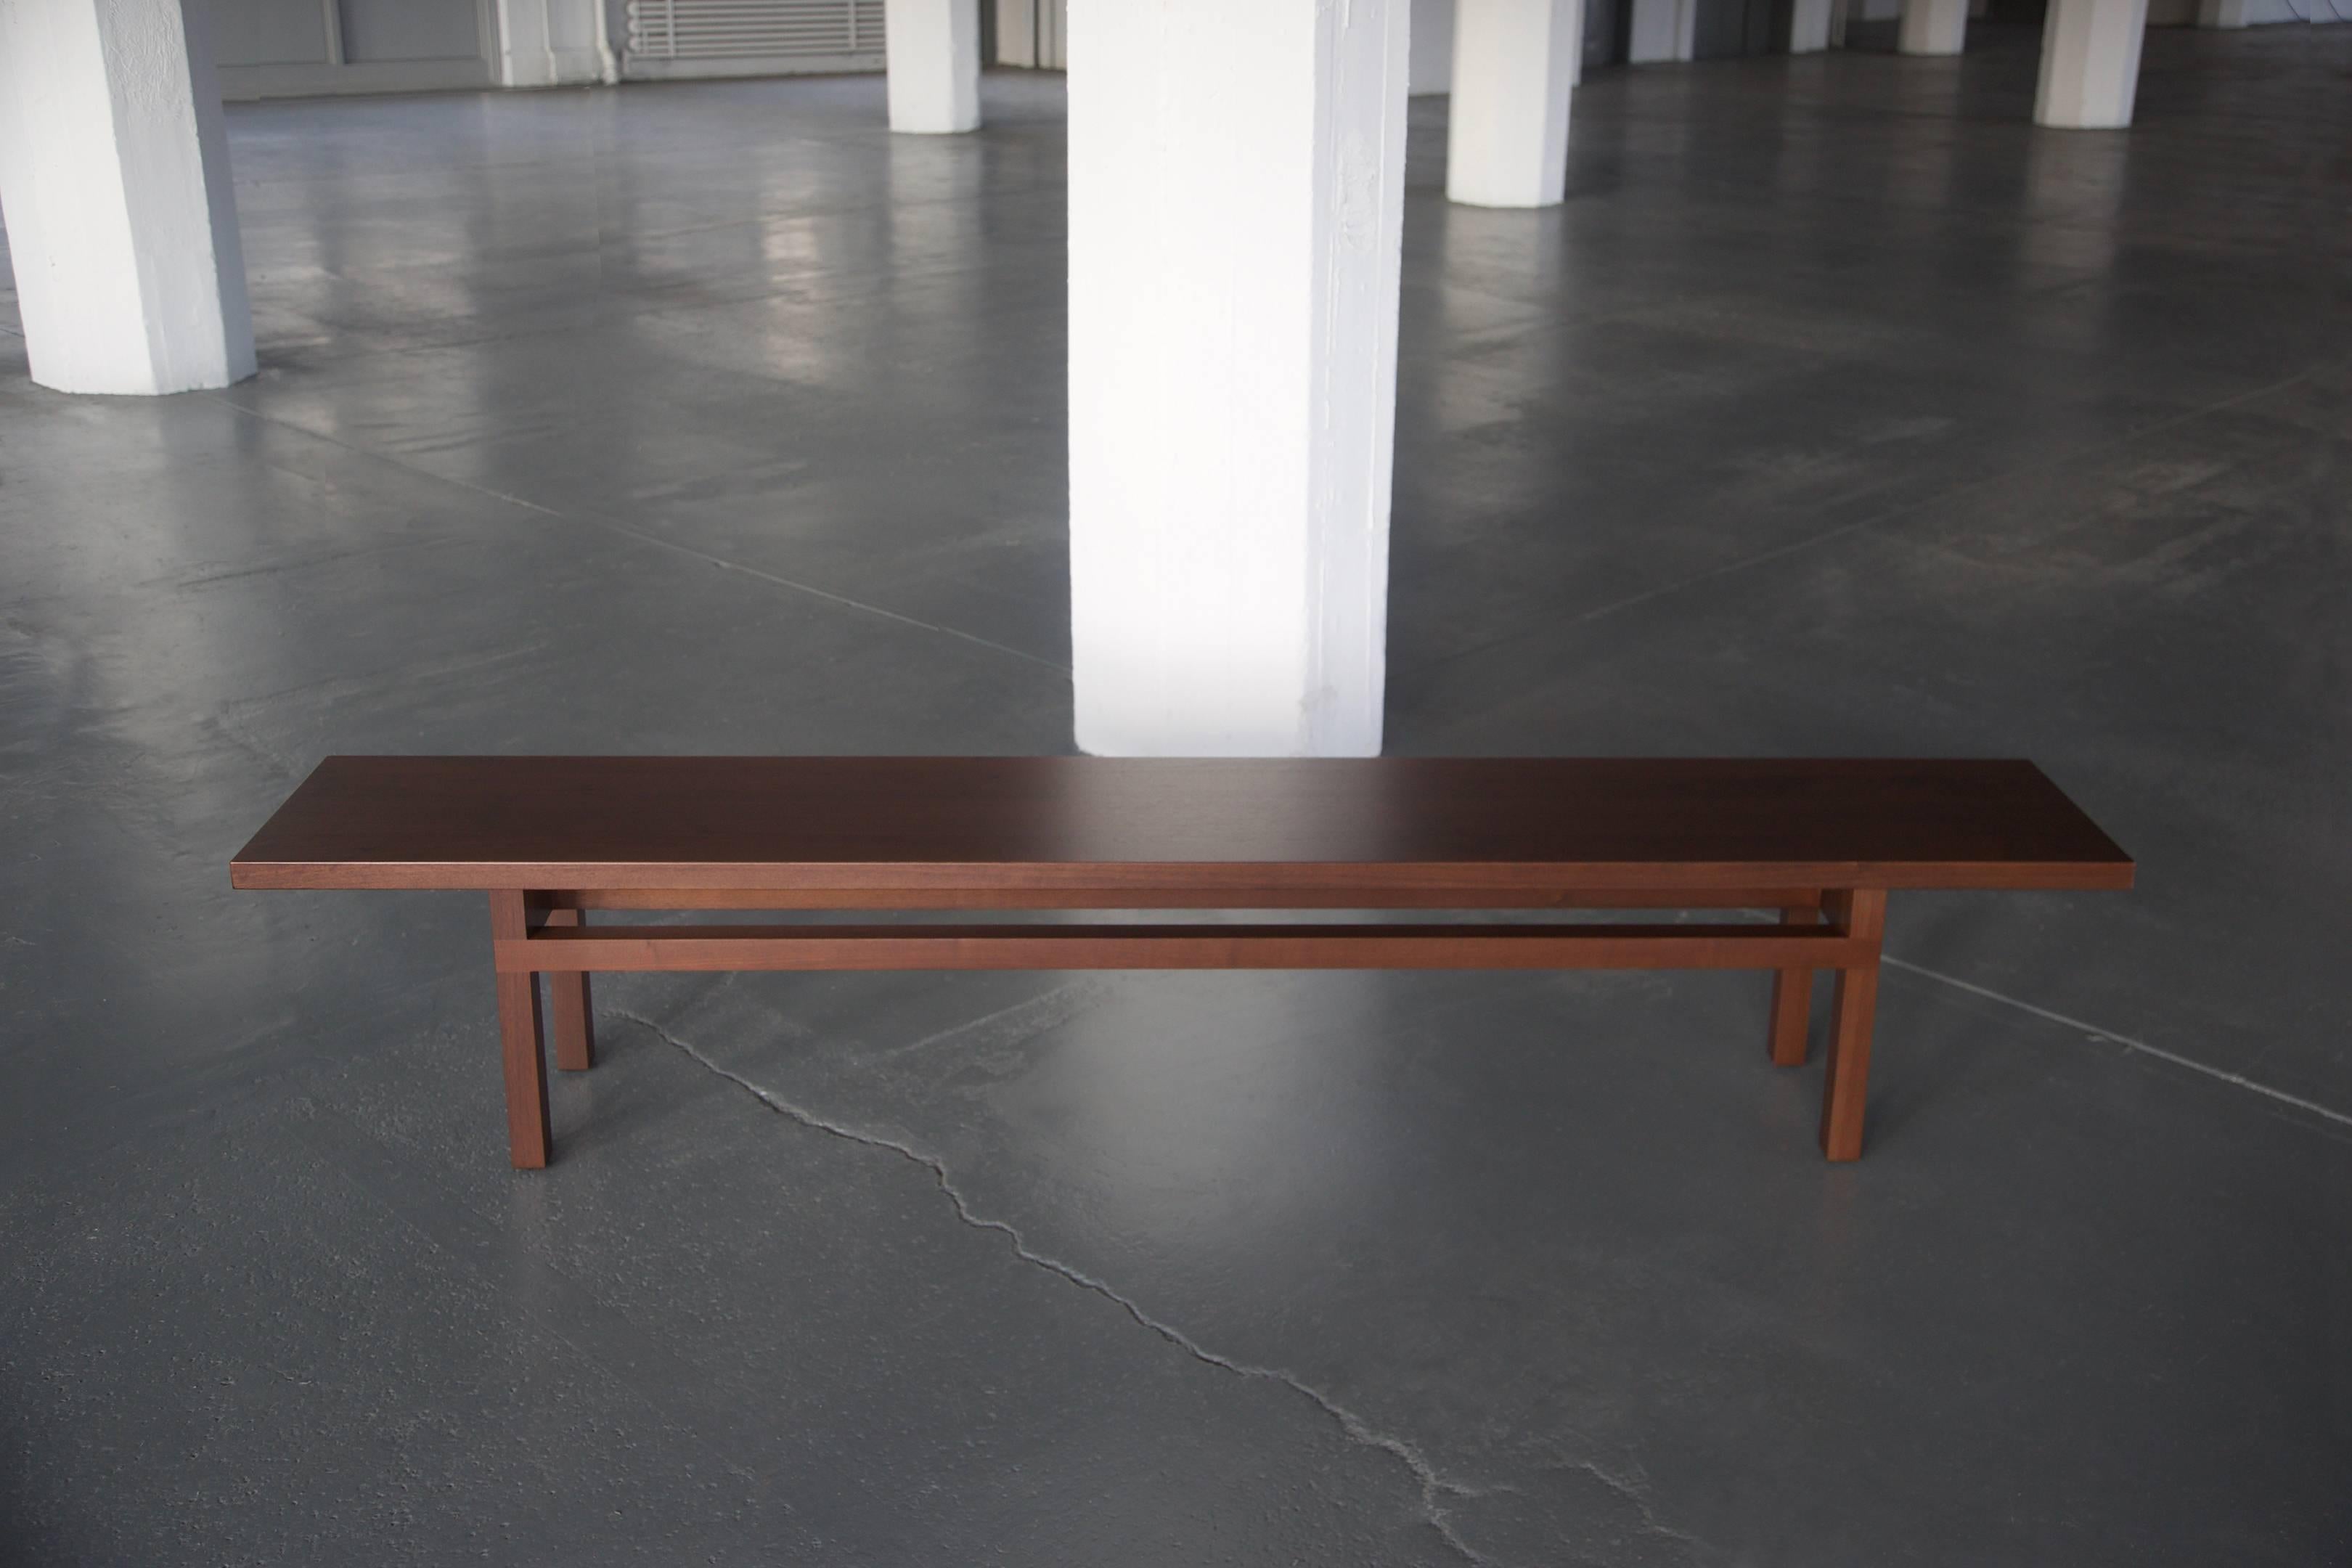 This contemporary bench is constructed of solid wood and made to order in our Brooklyn studio. Pictured in (darkened) walnut, the YARROW Bench is accented with lap joint aprons and enlists group of slender timbers to visually elongate the